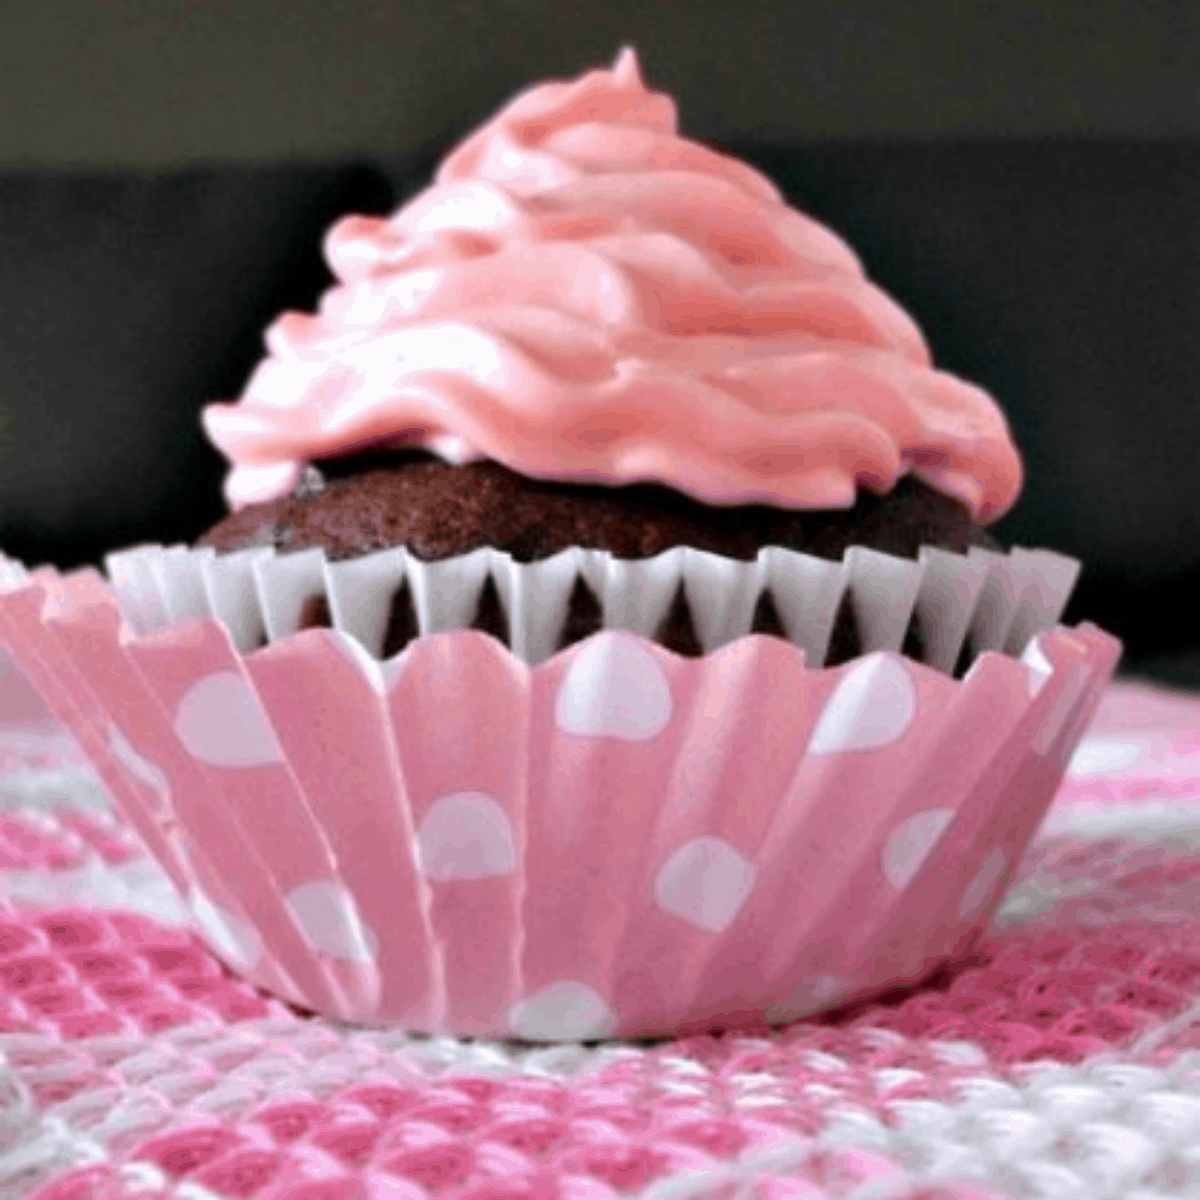 https://happyhealthymotivated.com/wp-content/uploads/2012/11/one-bowl-chocolate-cupcake-for-one-featured.png